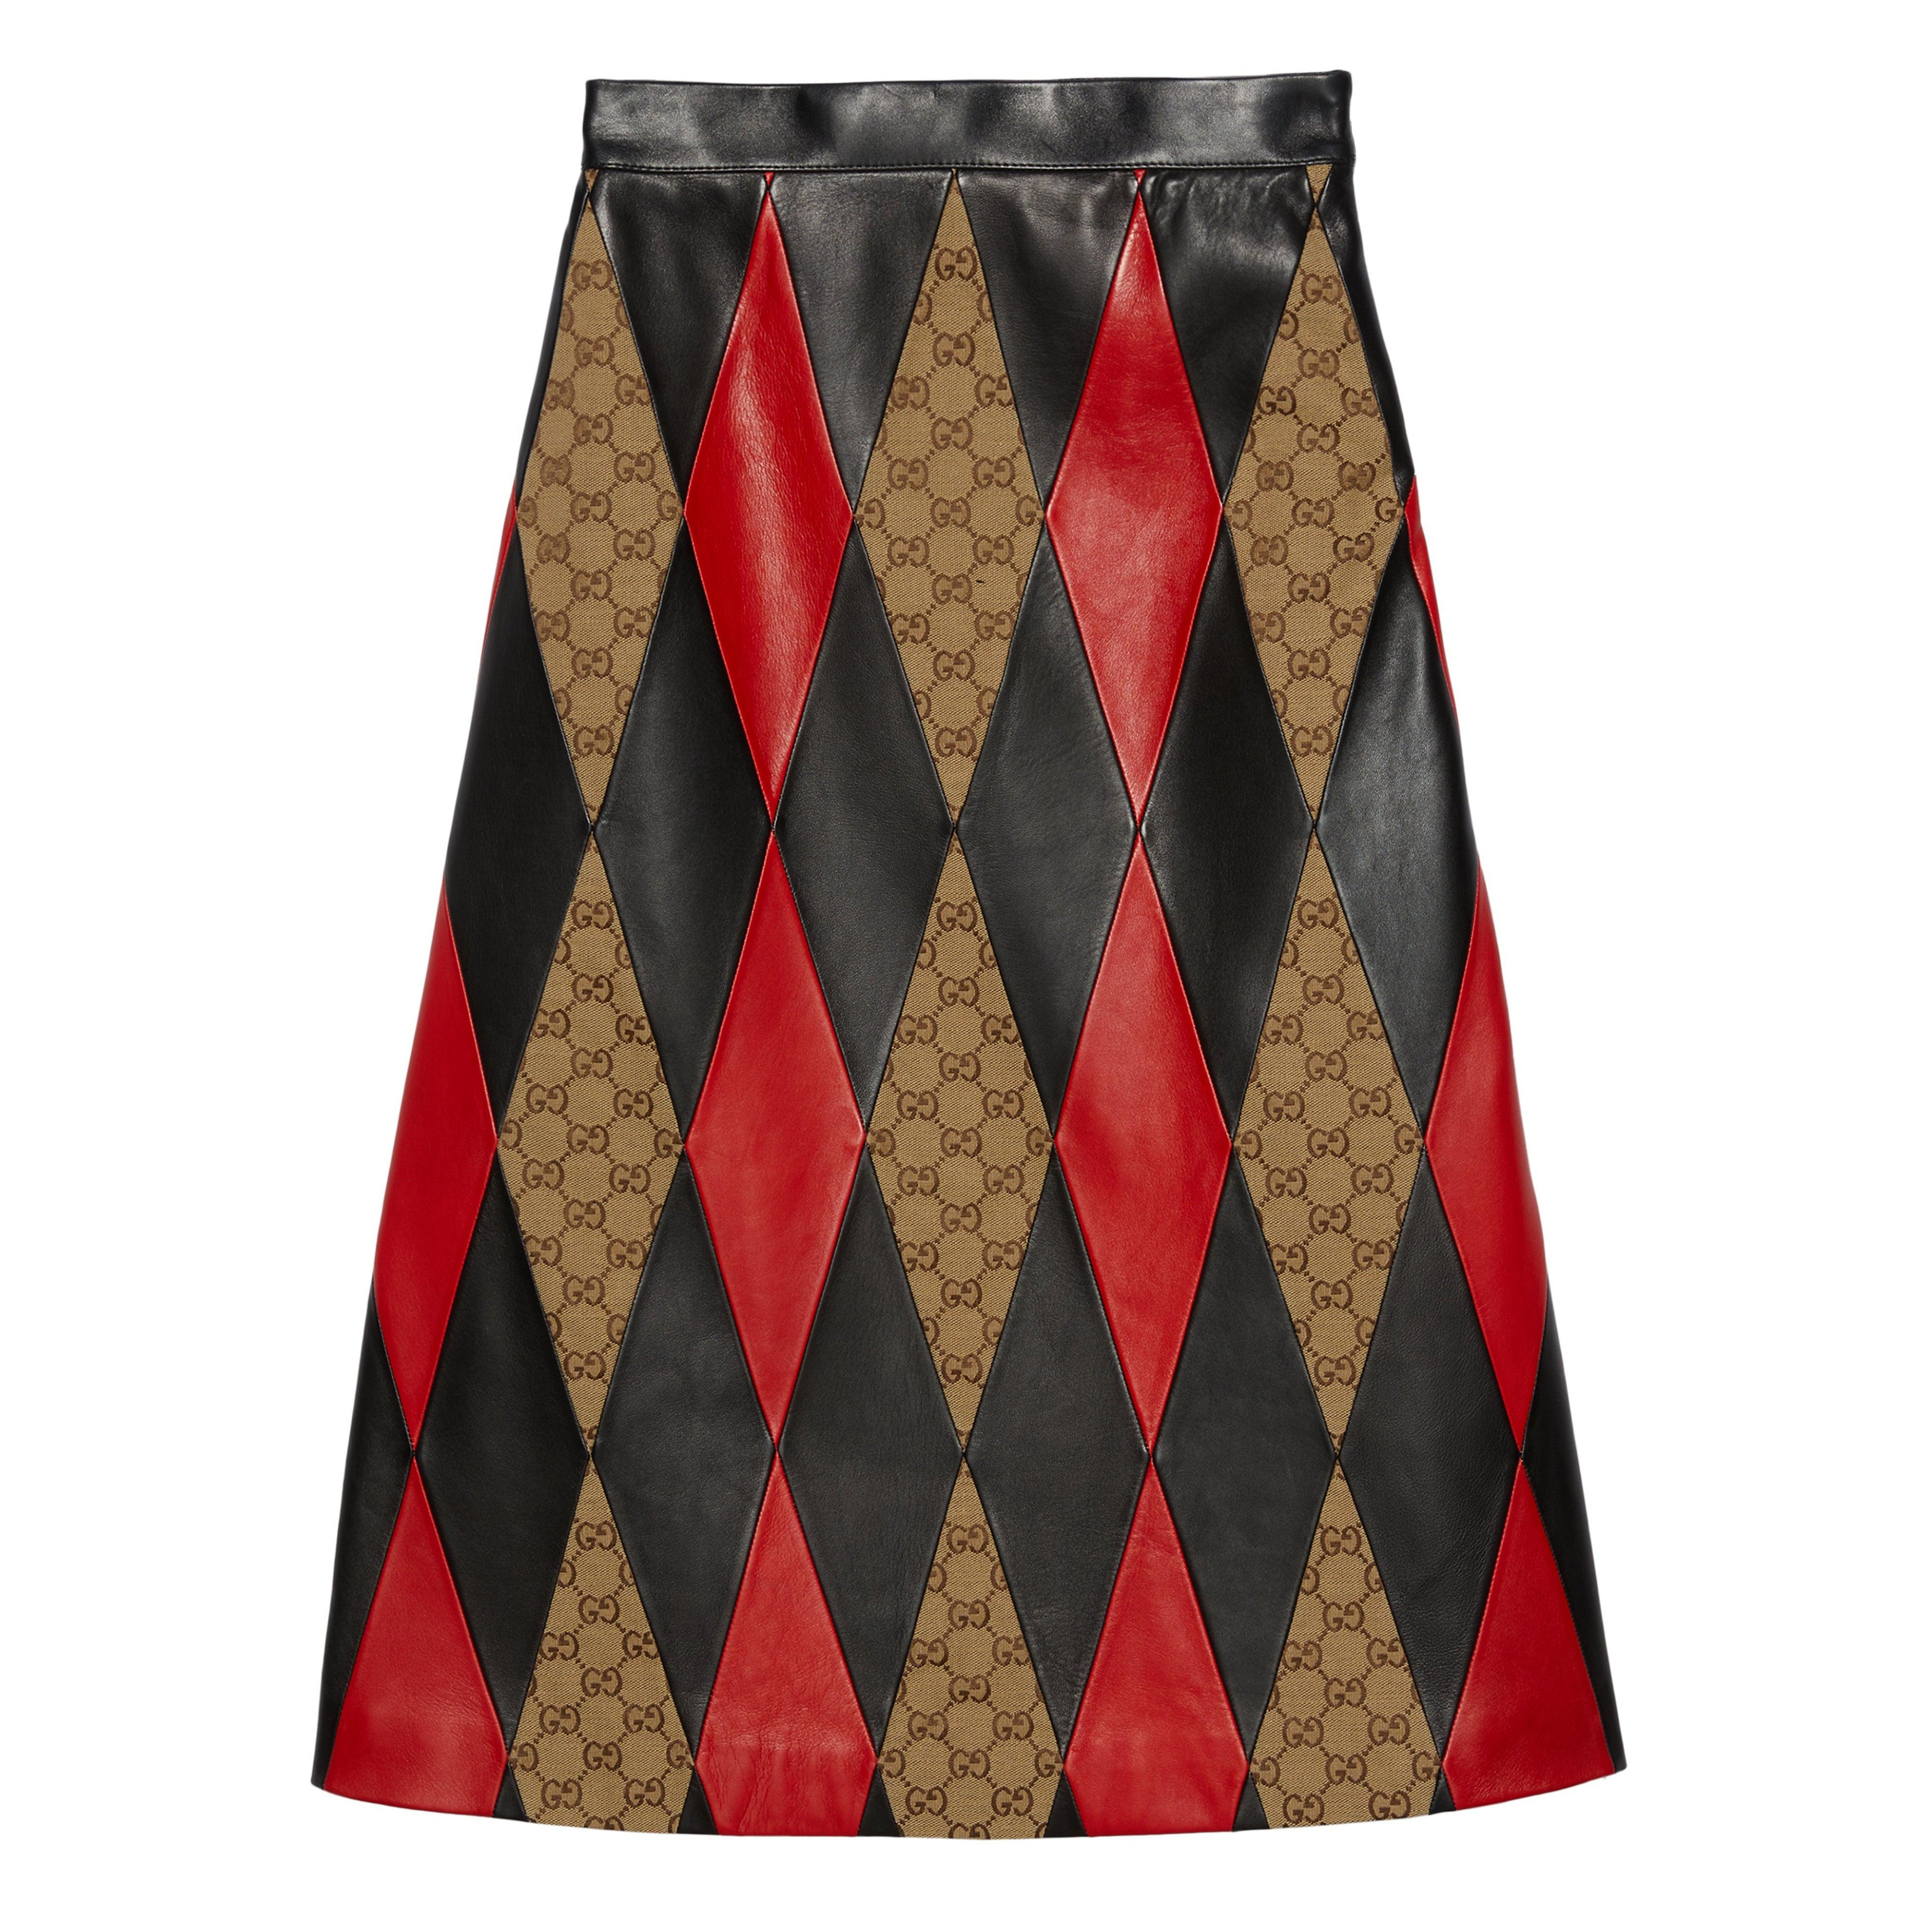 Gucci - Women’s DSM Exclusive Intarsia Leather Midi Skirt - (Black/Red) by GUCCI